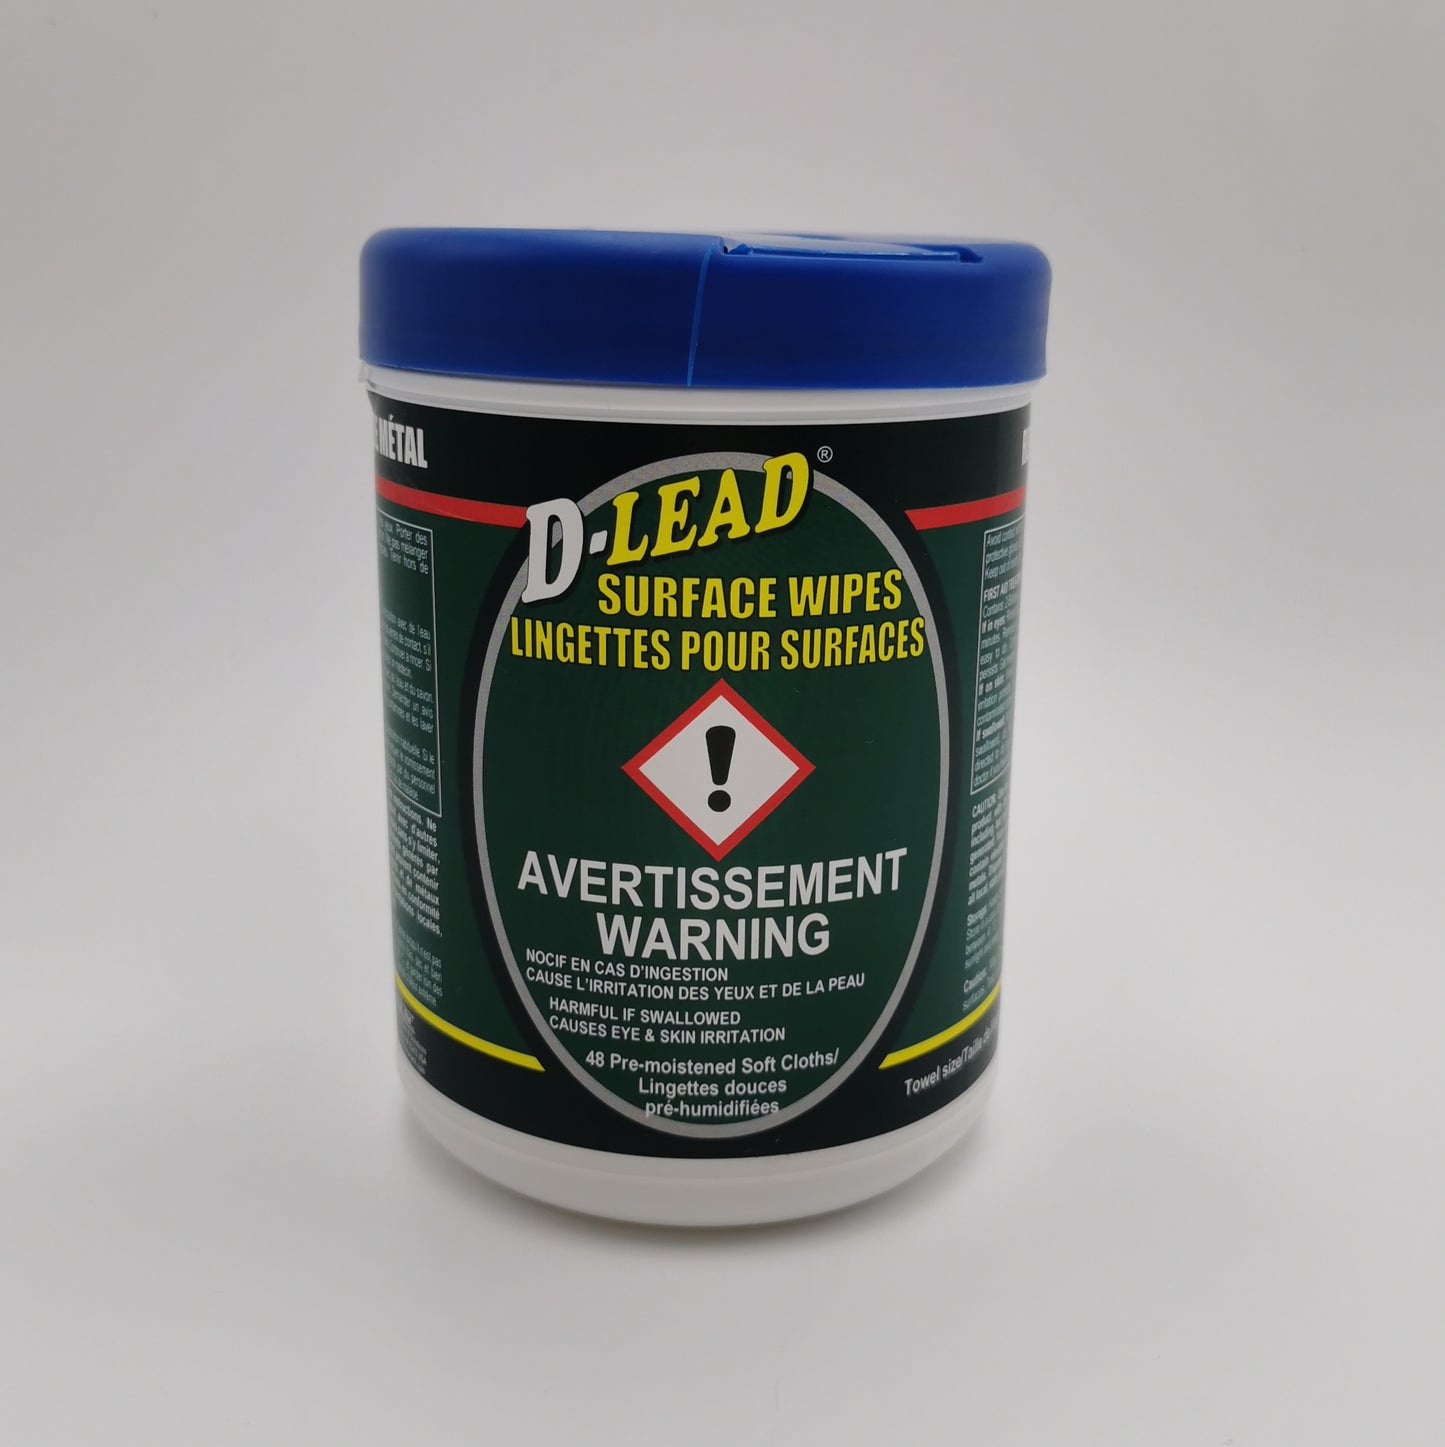 D-lead surface wipes 48 count